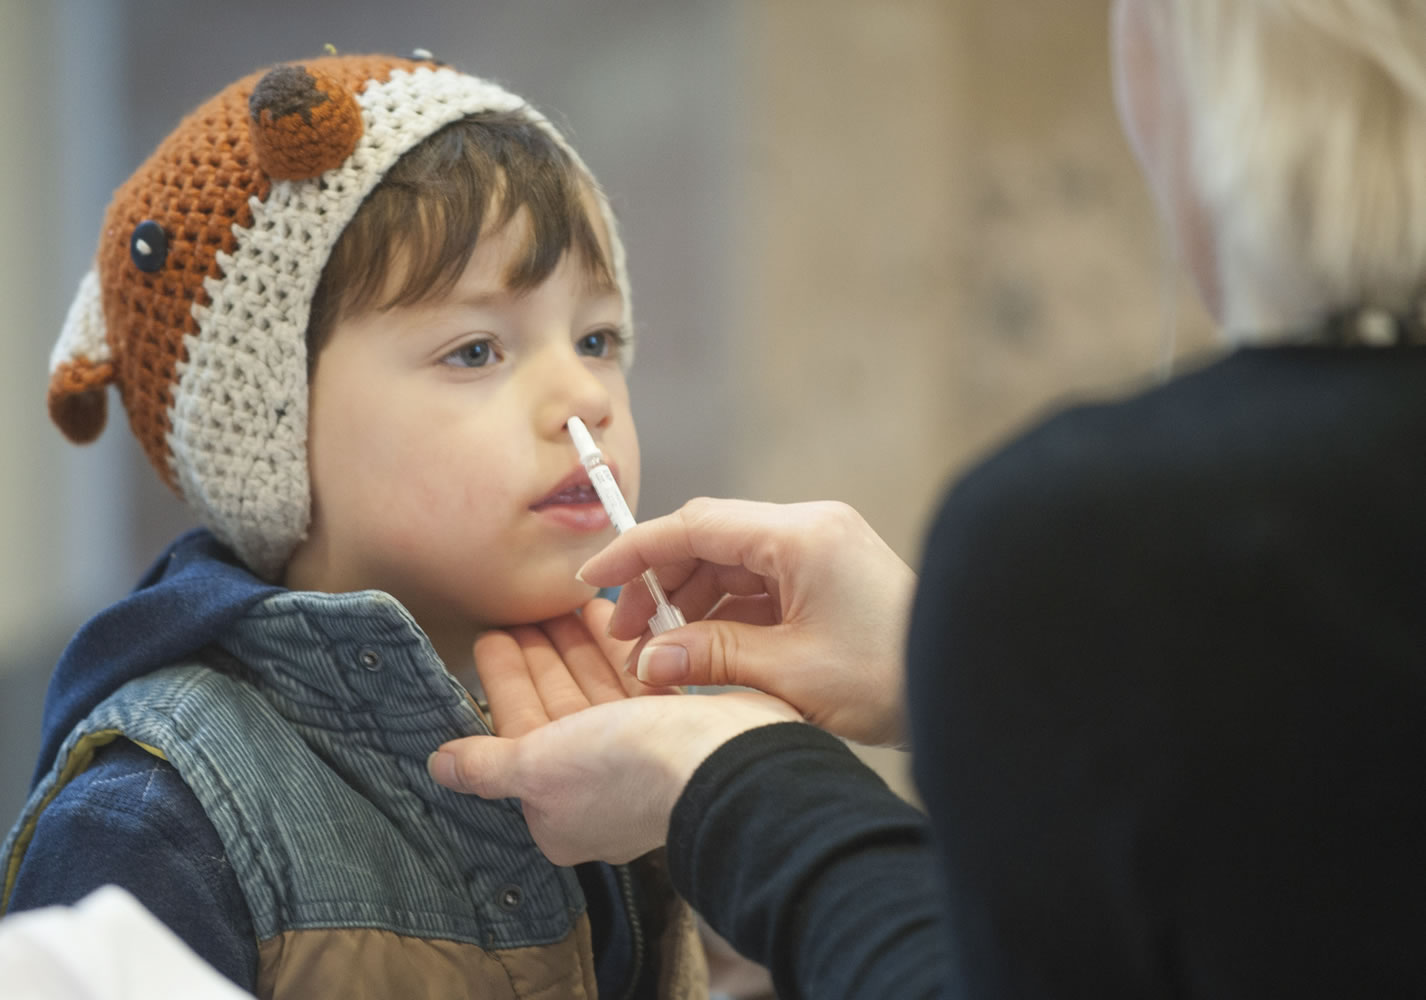 Felix North, 3, gets a flu-mist immunization during a free flu vaccine clinic in 2015 at Legacy Salmon Creek Medical Center in Vancouver. Felix and his mom, Ewa North, were immunized to protect younger brother, 4-month-old Emmett, who is too young to be immunized.